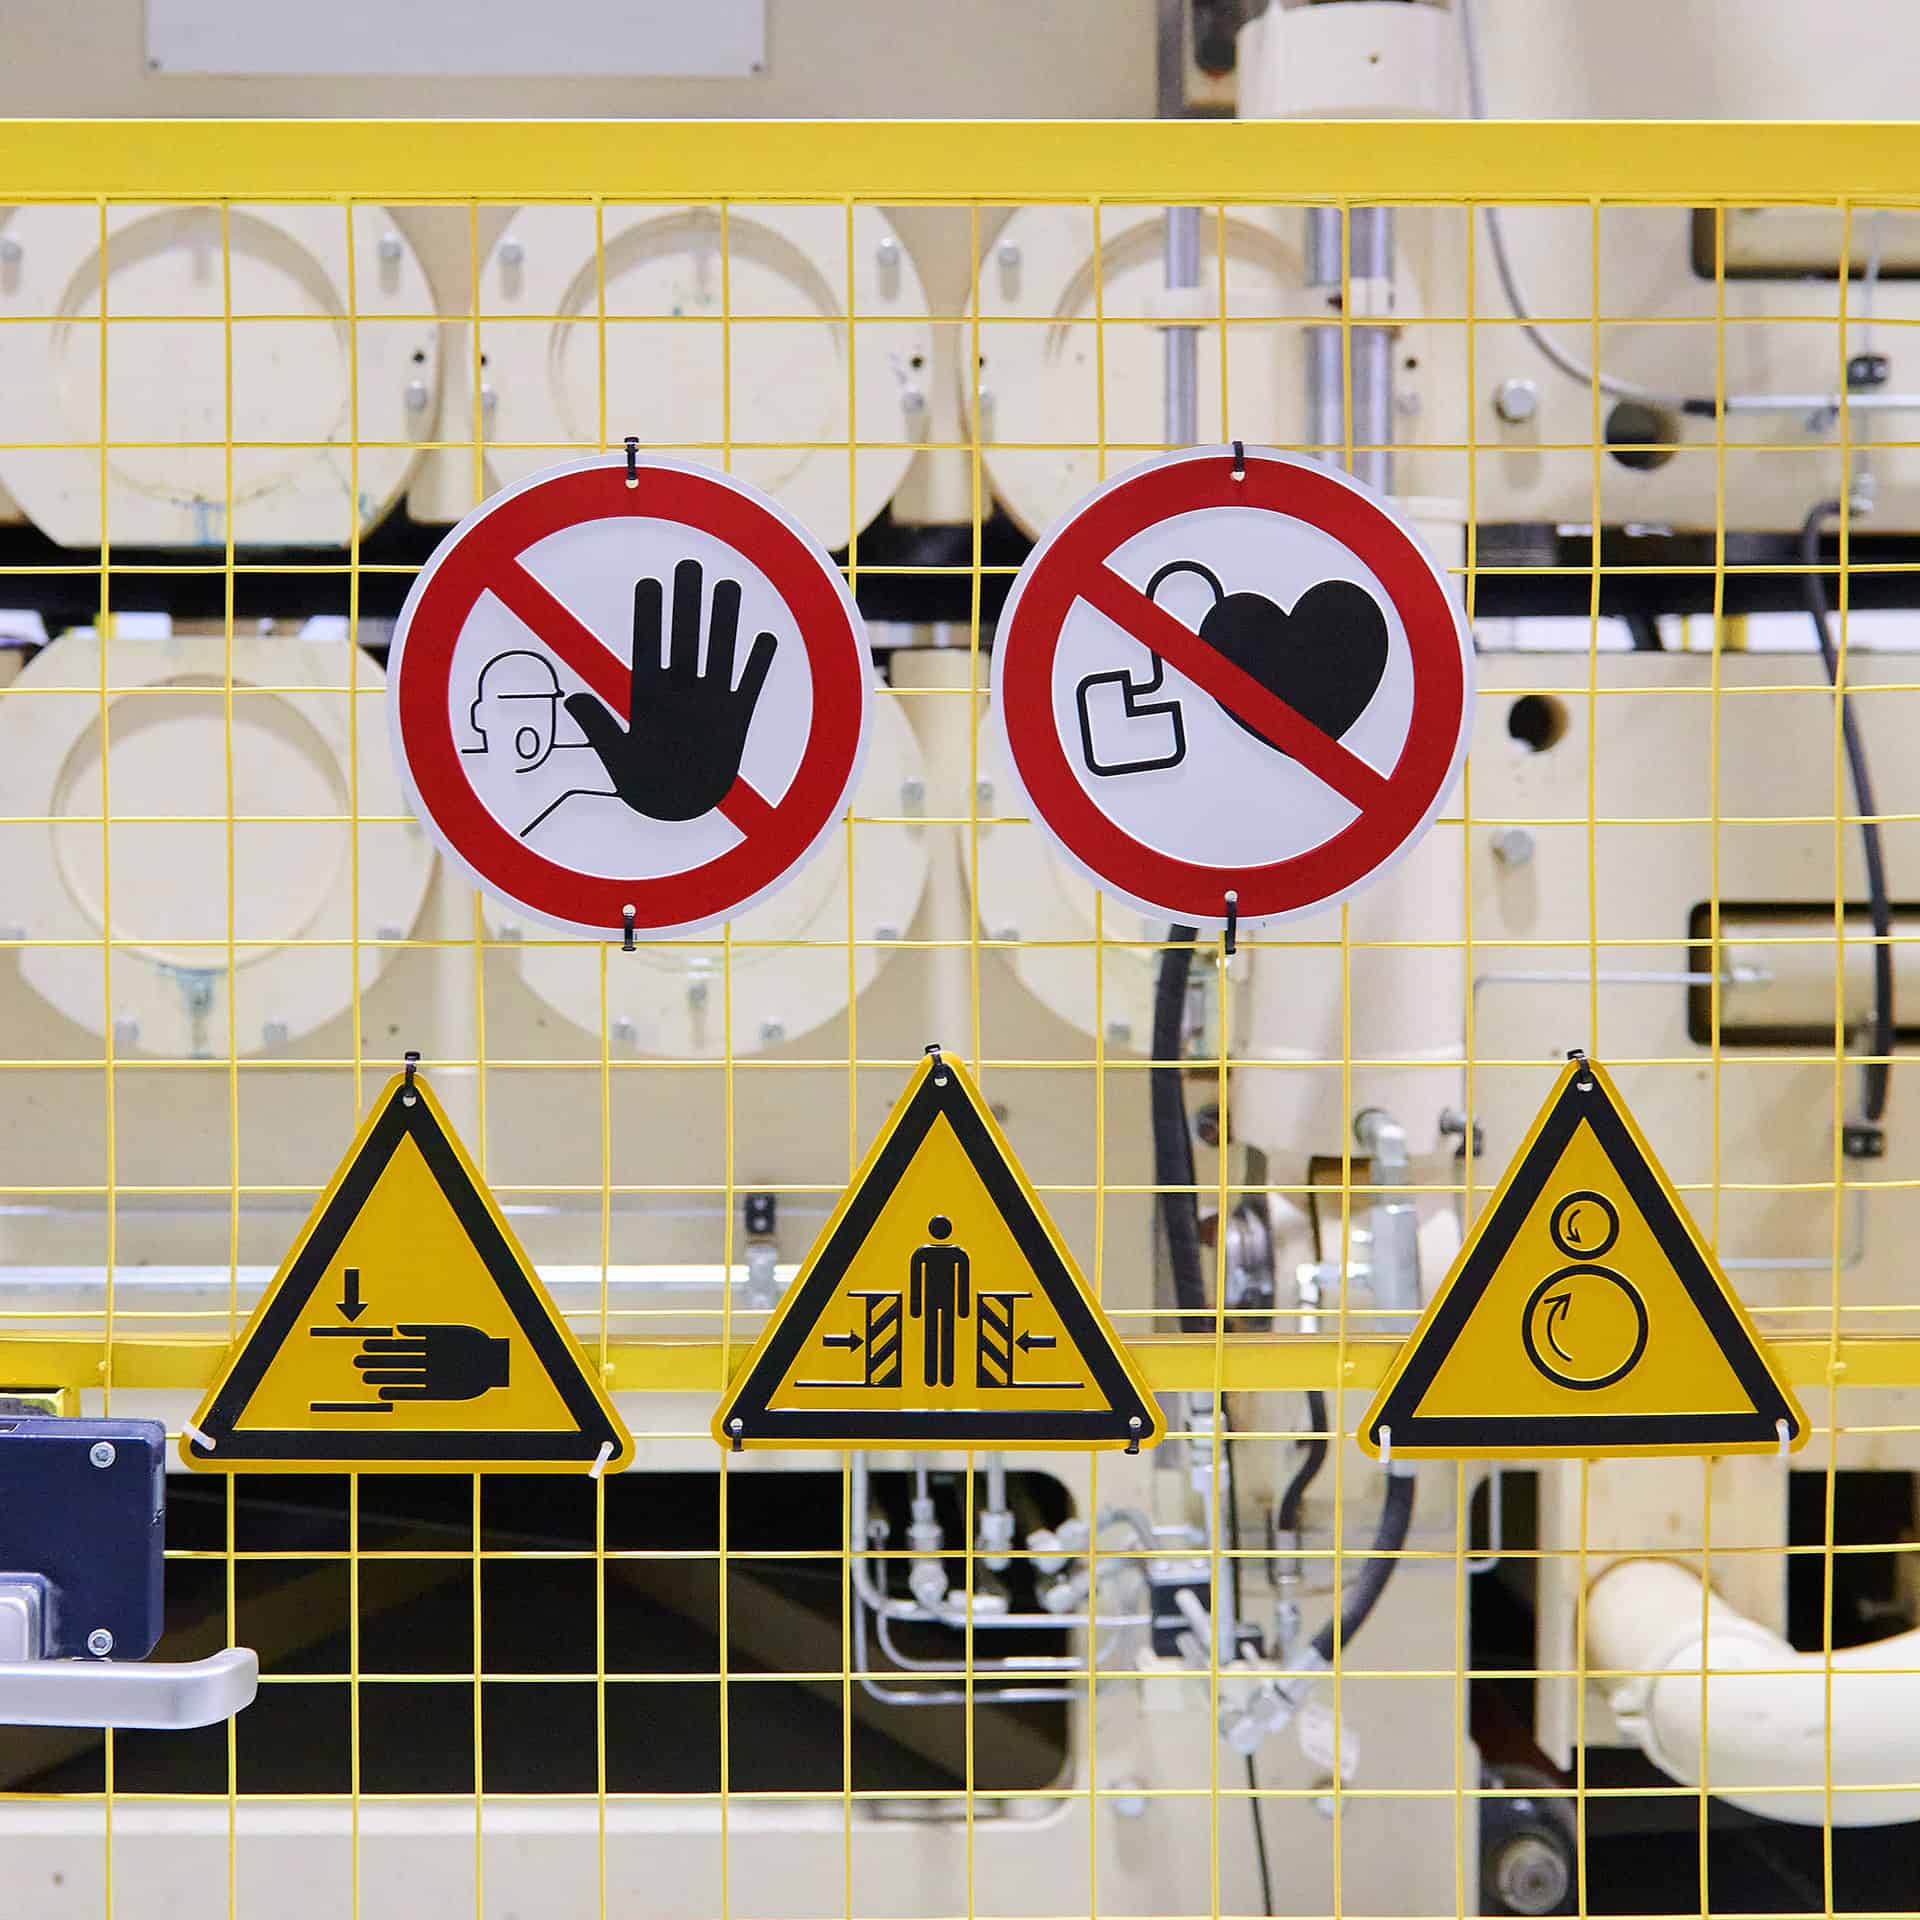 A display of safety signs on a fence.